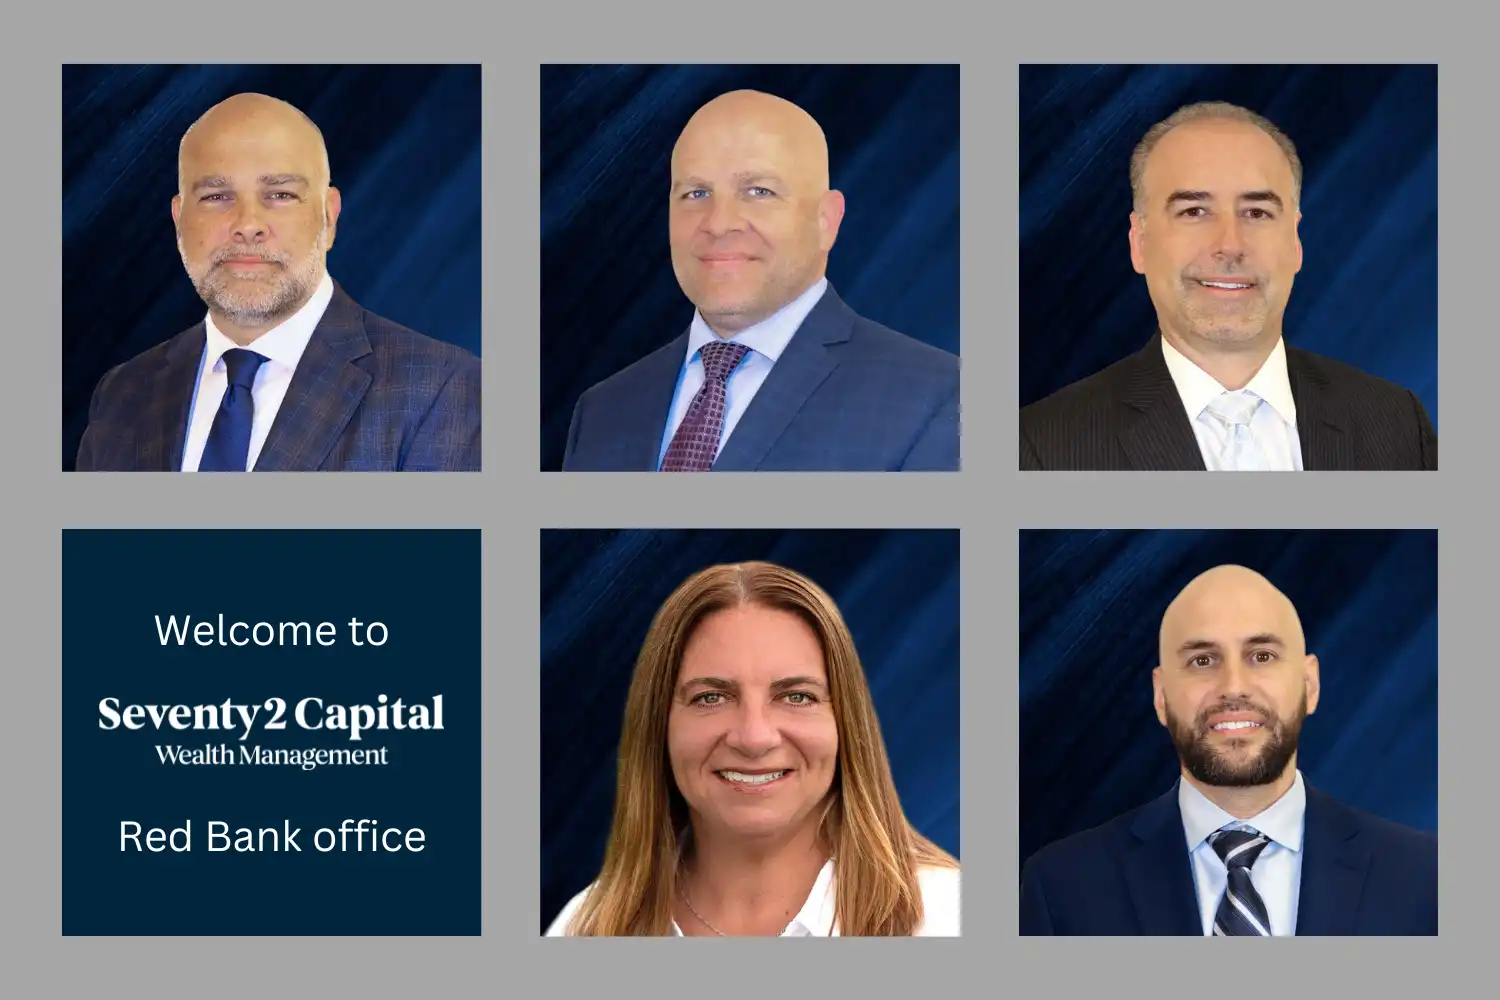 Seventy2 Capital expands in Red Bank, NJ with the addition of Brent McTaggart, Jason McTaggart, and John Busco, Executive Vice Presidents